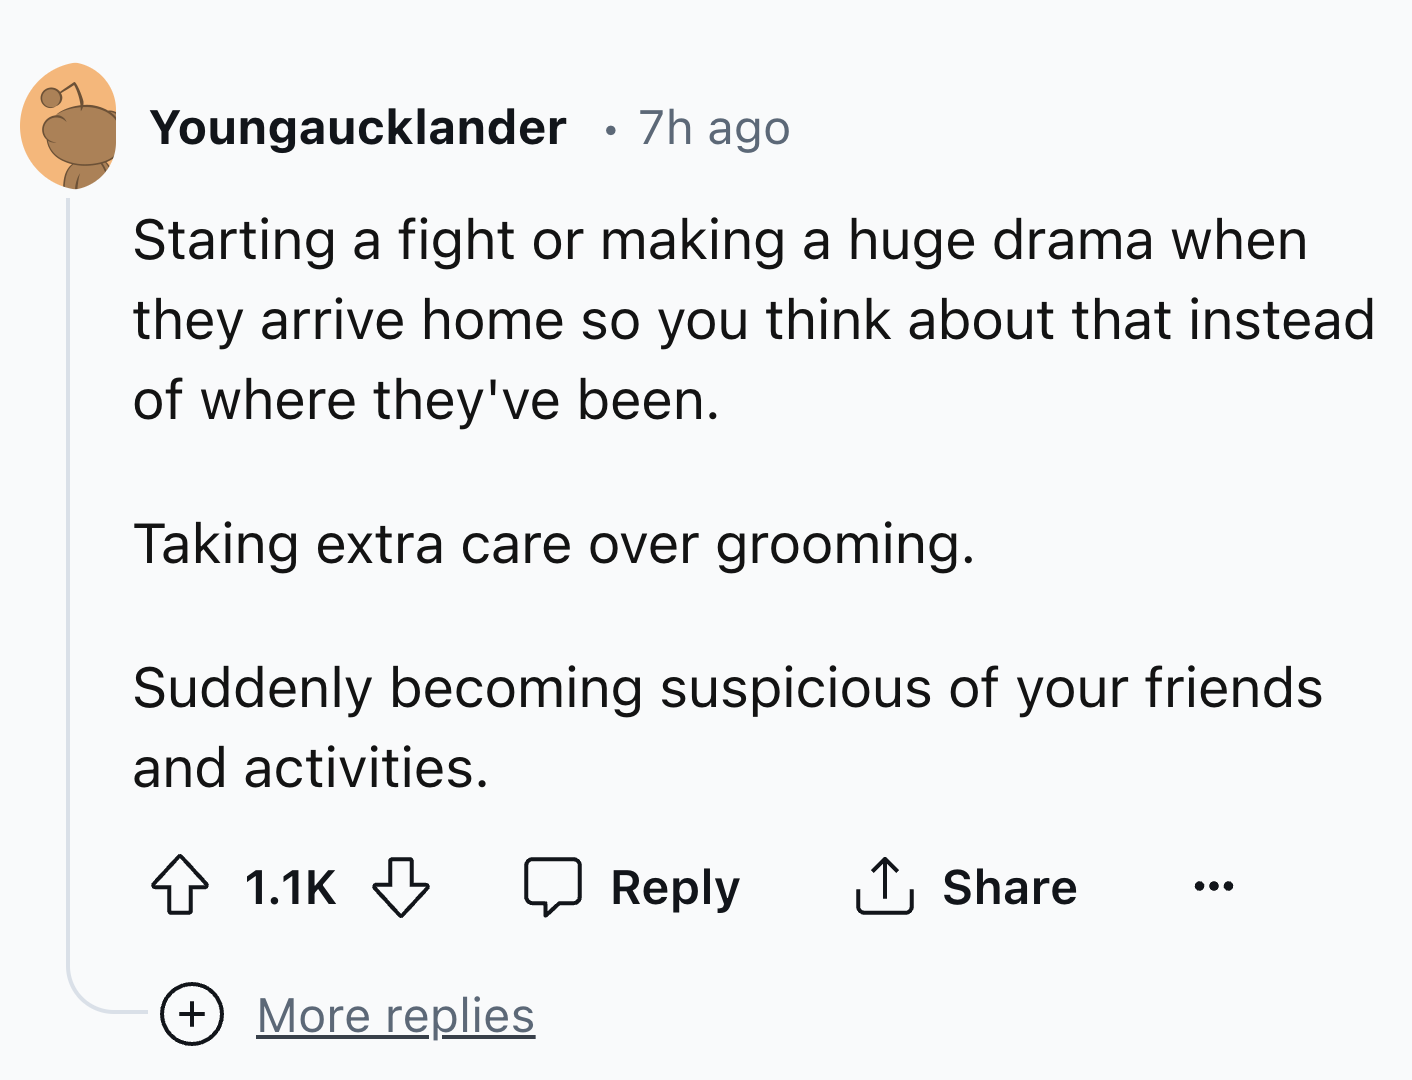 circle - Youngaucklander 7h ago Starting a fight or making a huge drama when they arrive home so you think about that instead of where they've been. Taking extra care over grooming. Suddenly becoming suspicious of your friends and activities. More replies